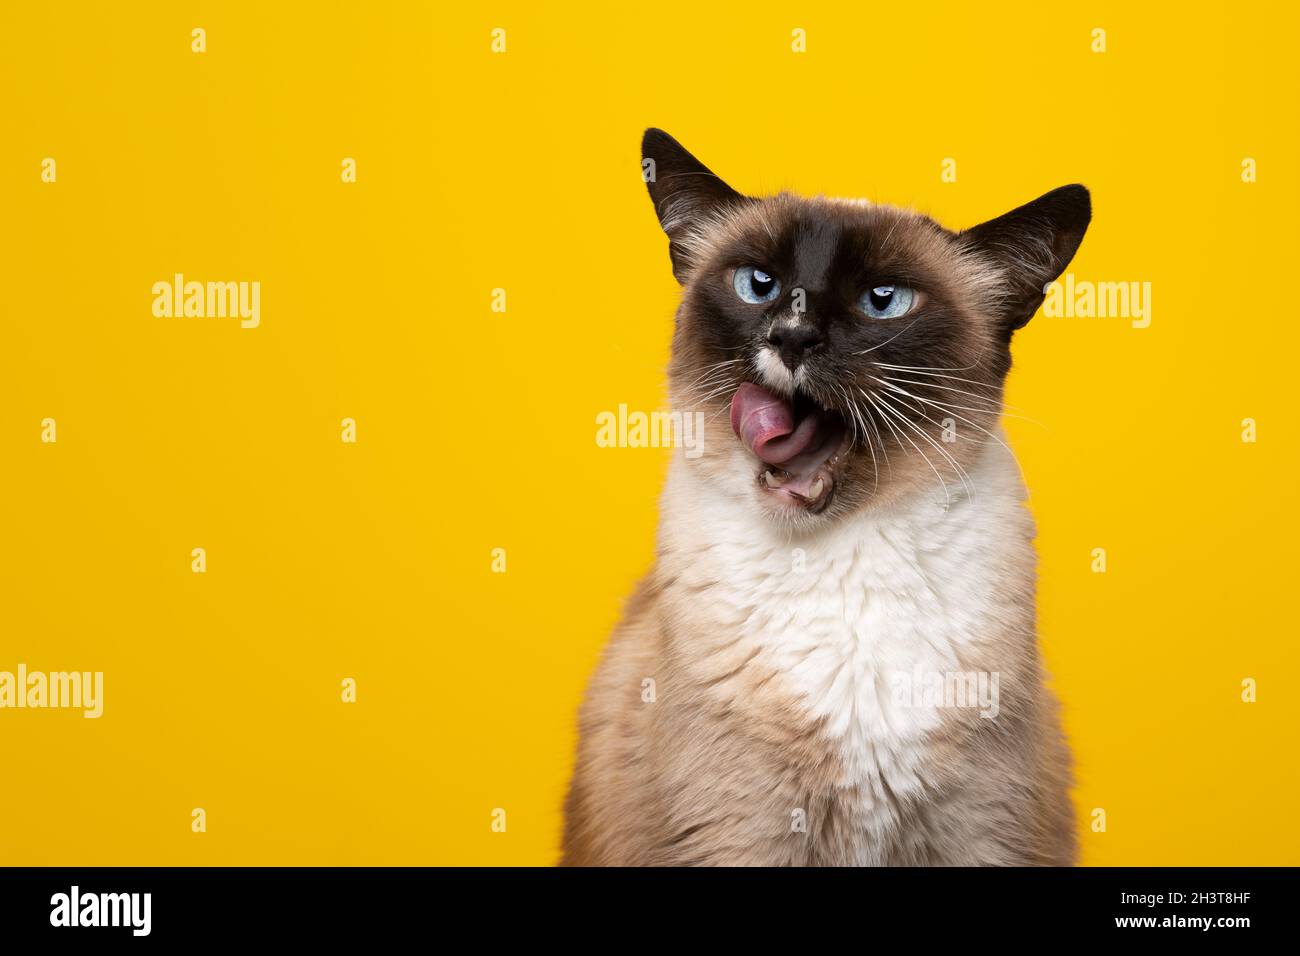 hungry blue eyed siamese cat licking lips with mouth wide open looking to the side on yellow background with copy space Stock Photo